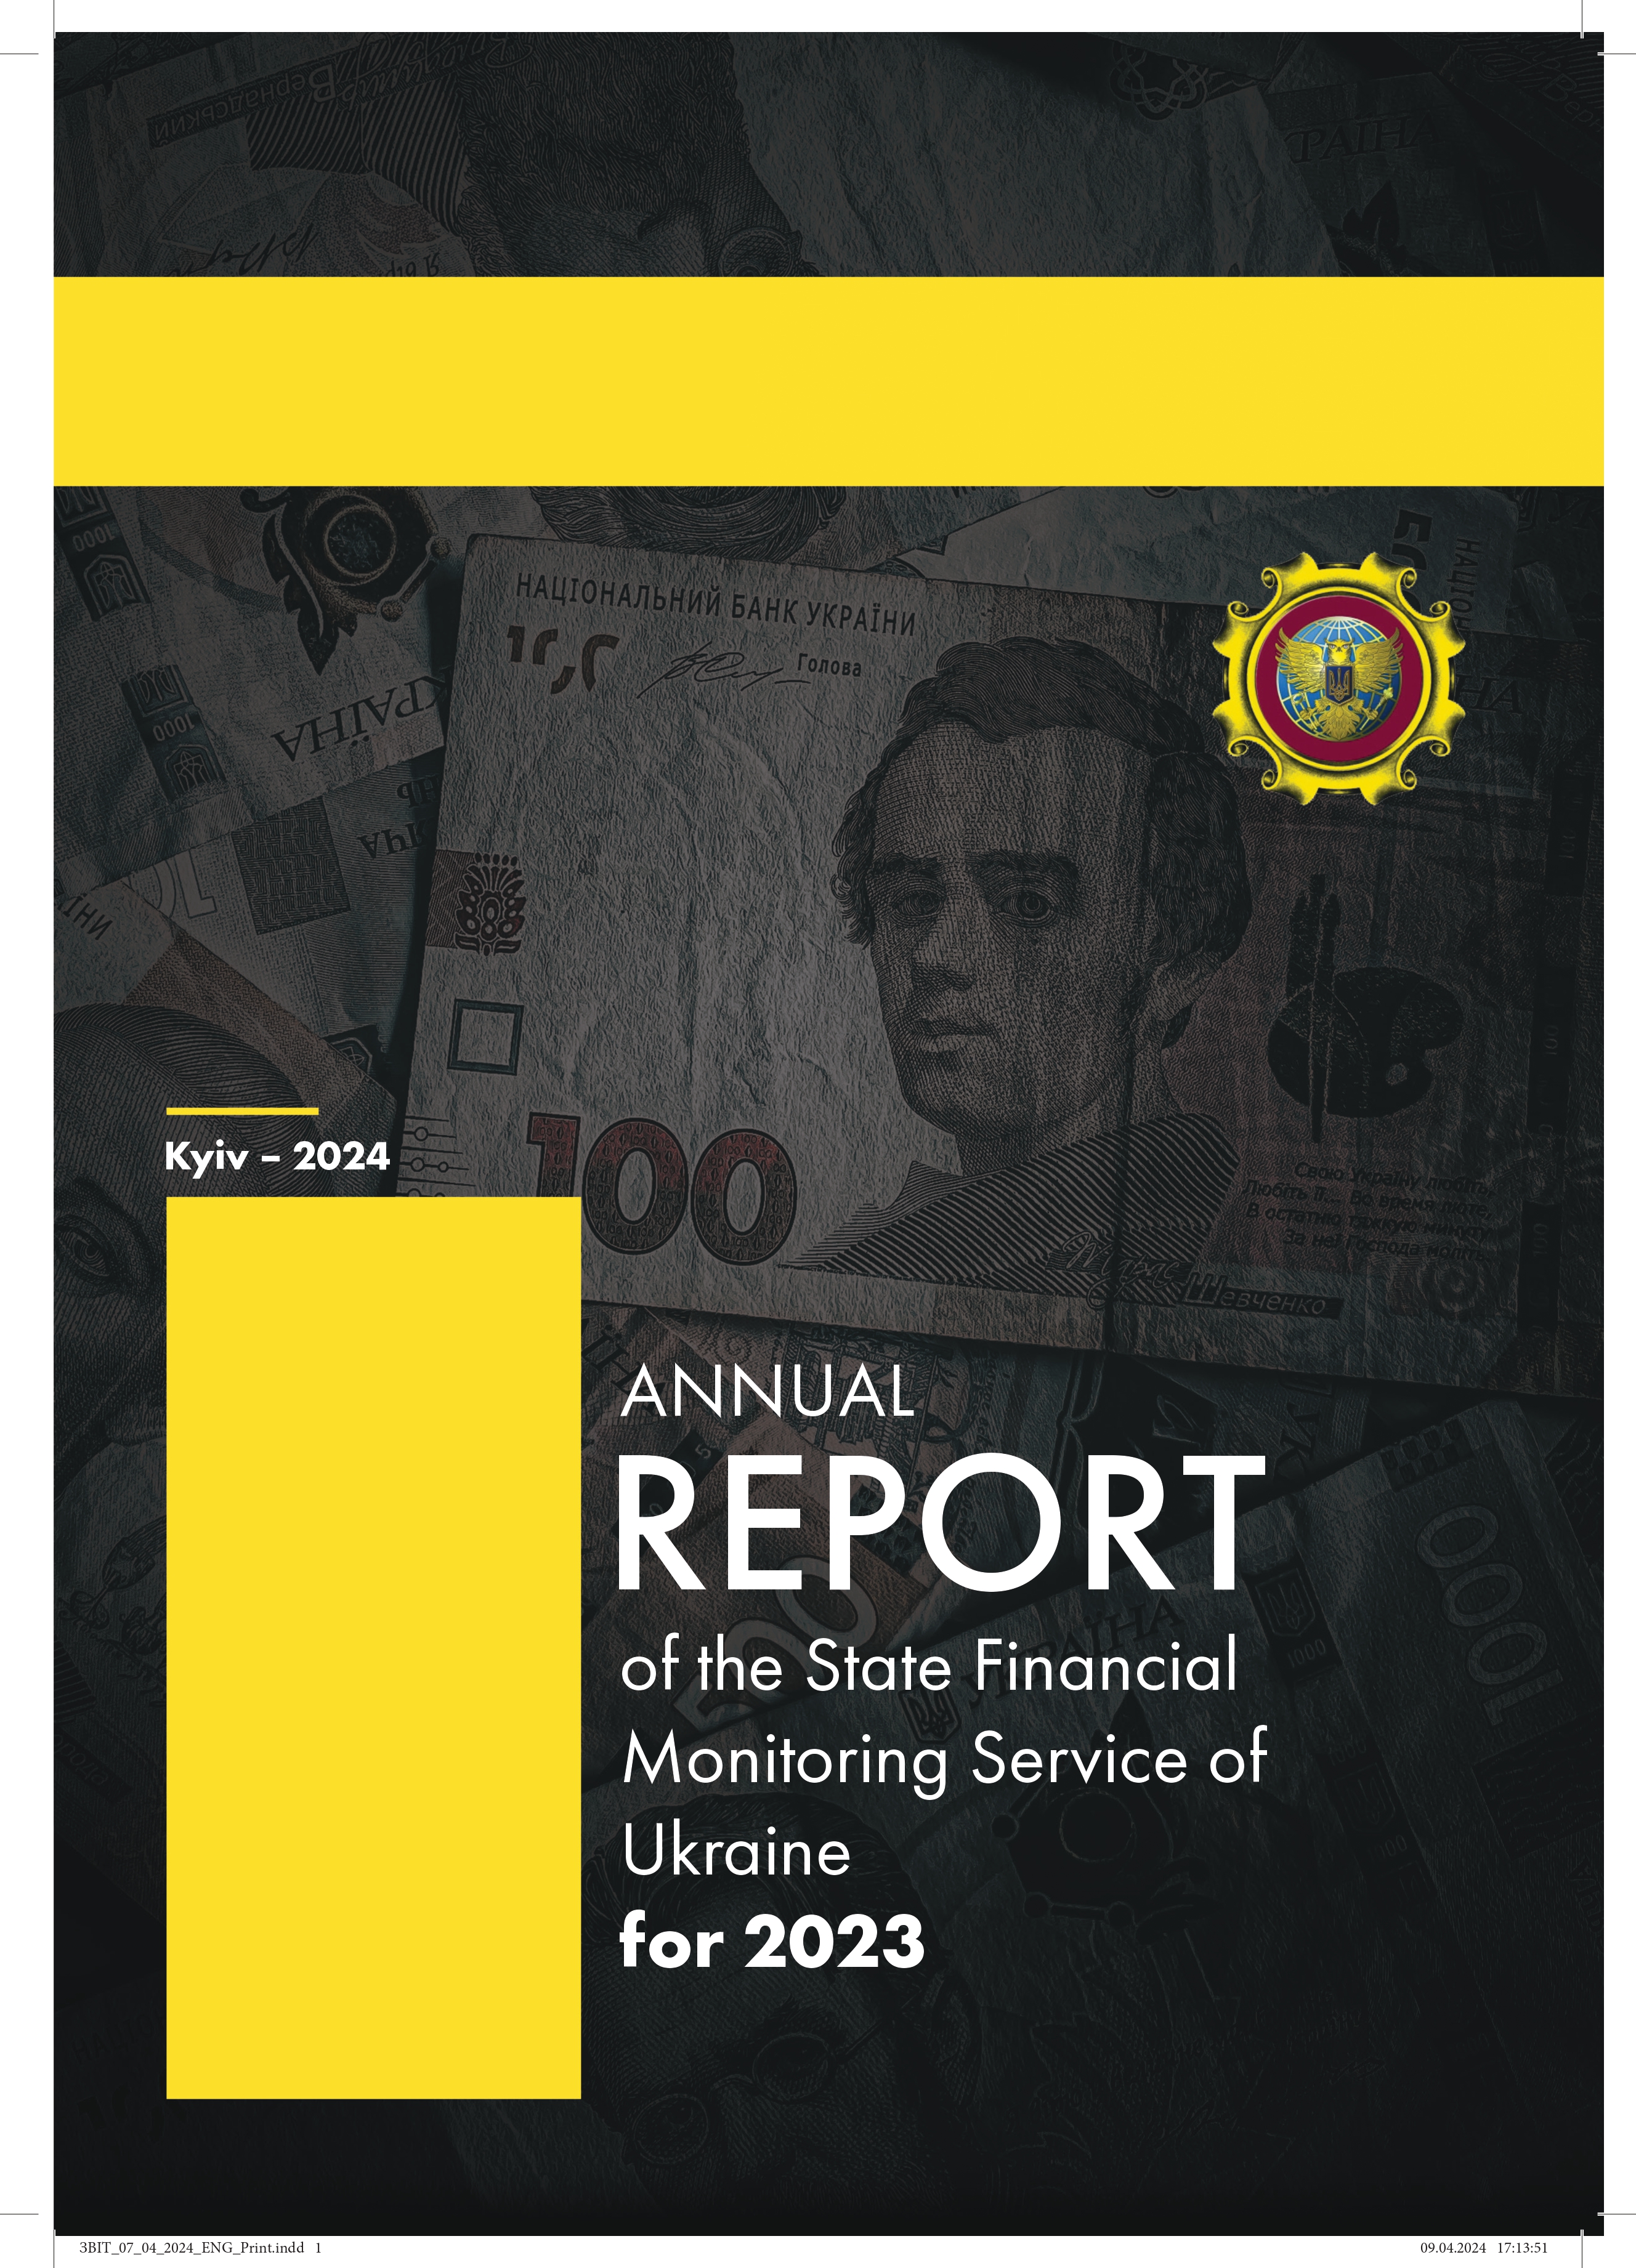 Report of the State Financial Monitoring Service of Ukraine 2023